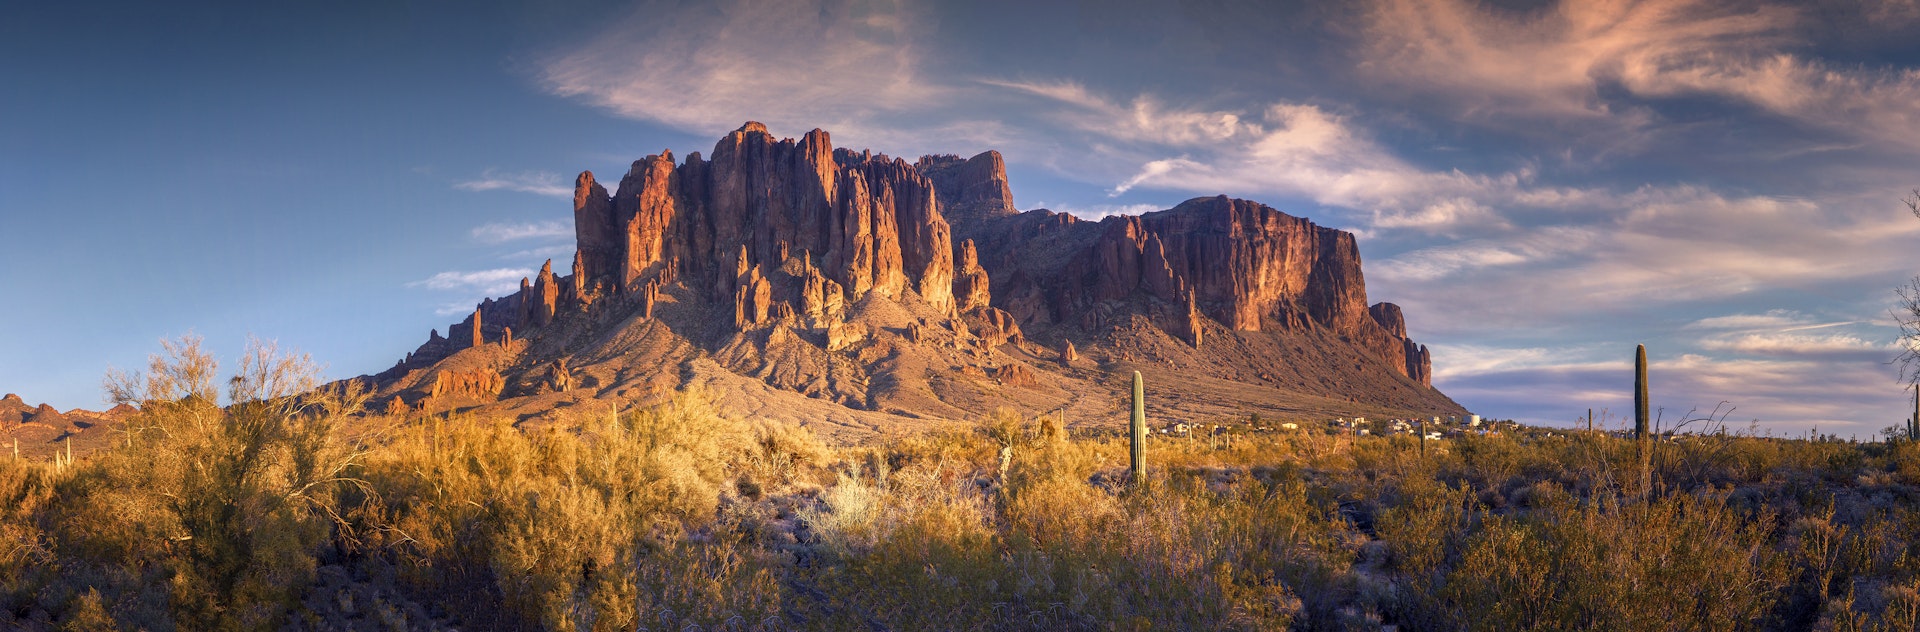 Panoramic view of Superstition Mountain near barren lands of Phoenix